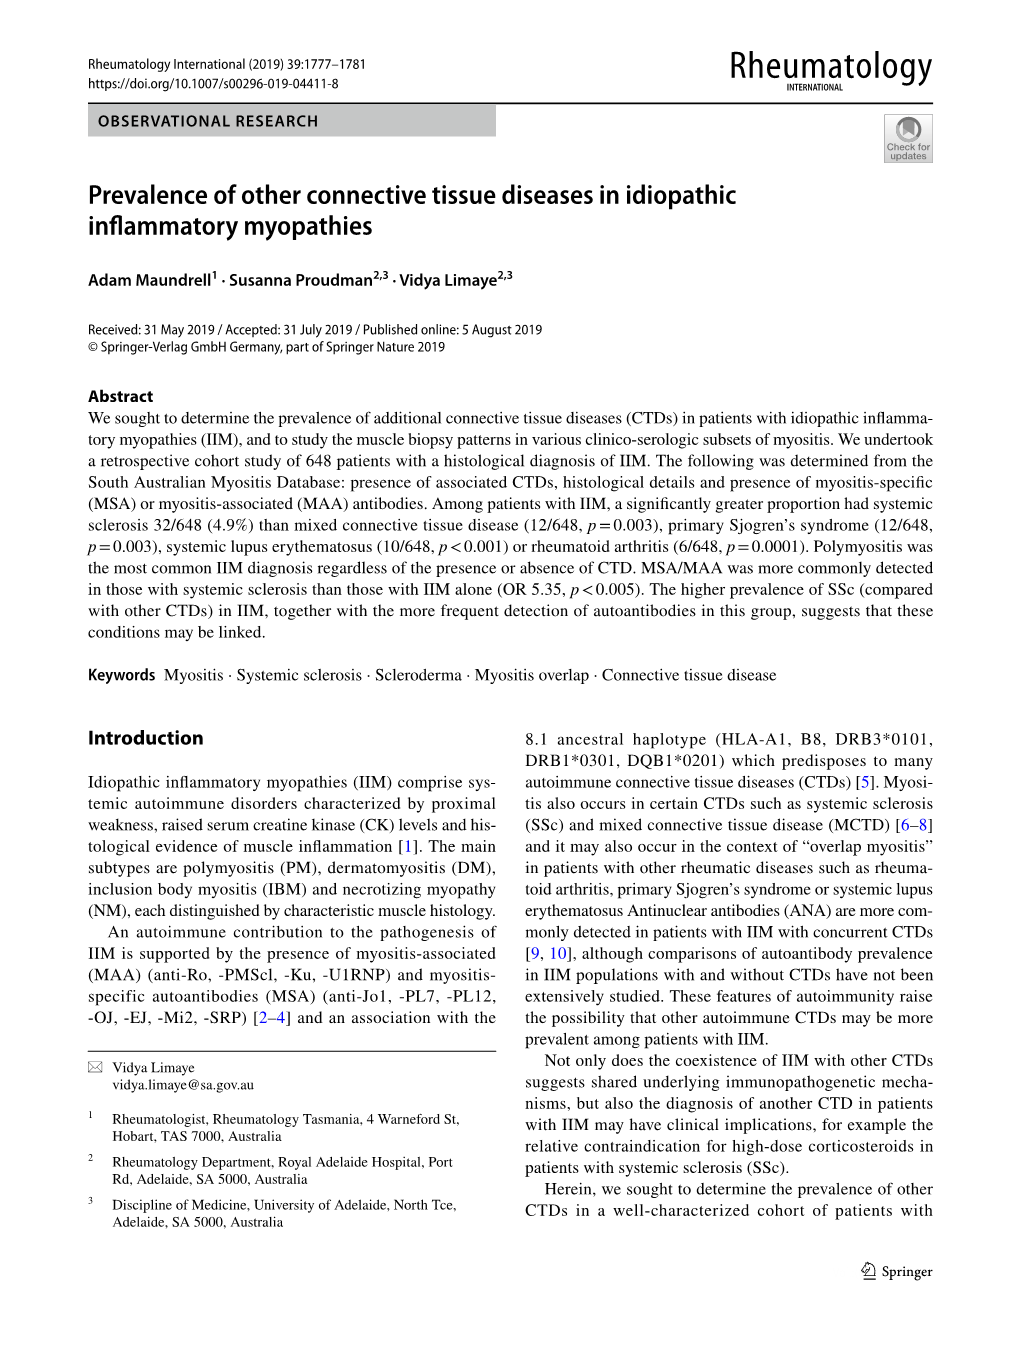 Prevalence of Other Connective Tissue Diseases in Idiopathic Inflammatory